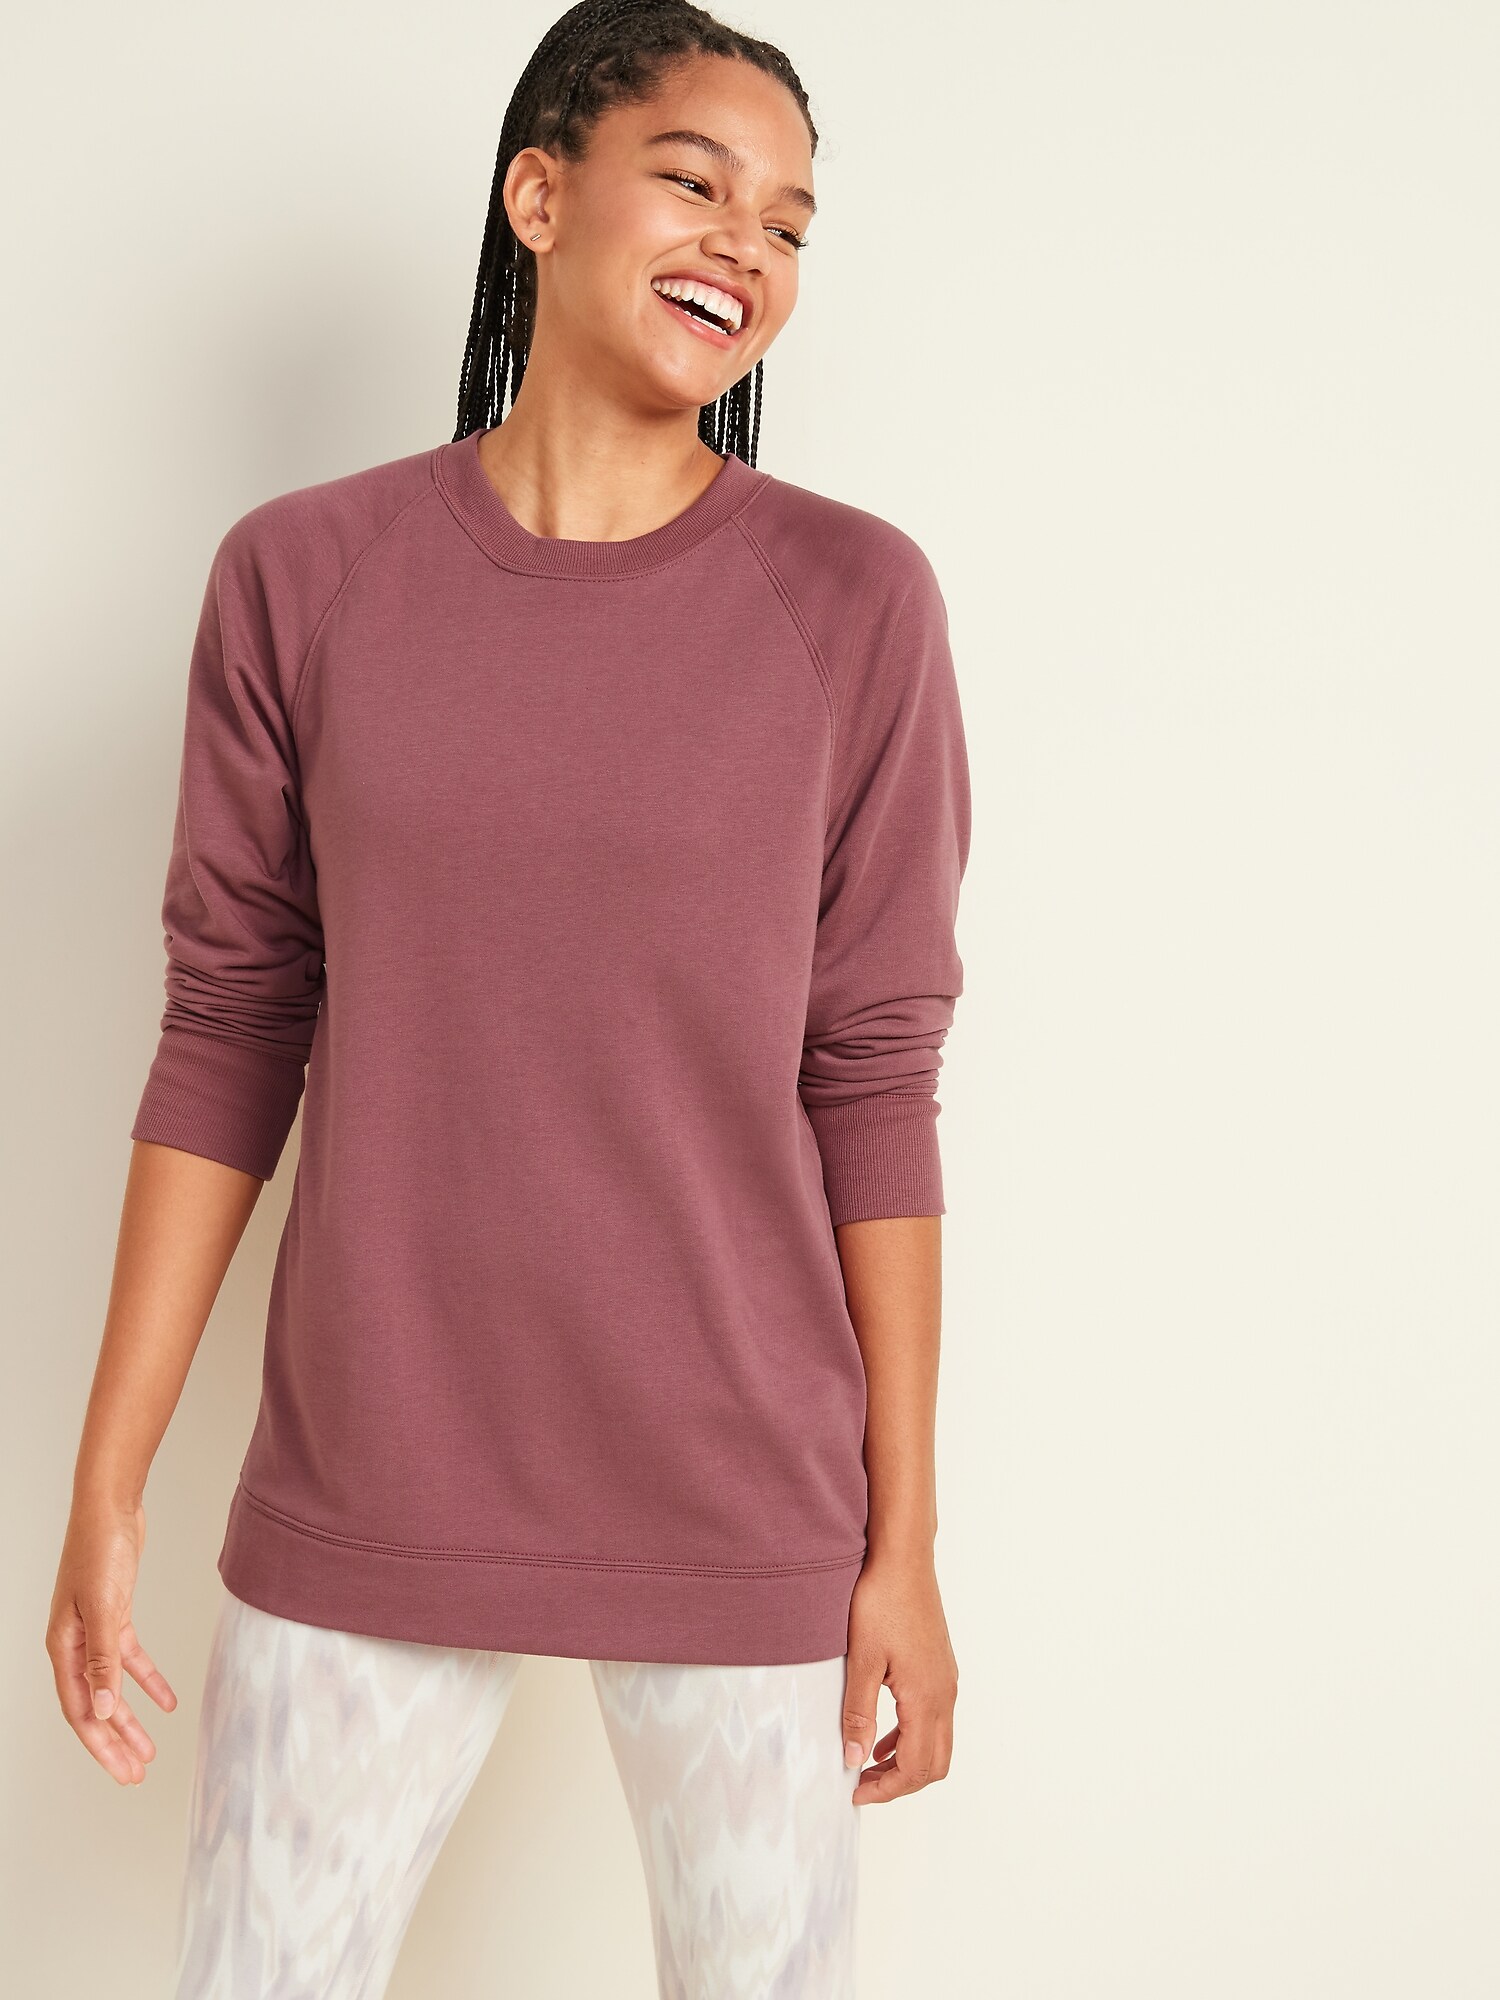 Loose-Fit French-Terry Crew-Neck Tunic for Women